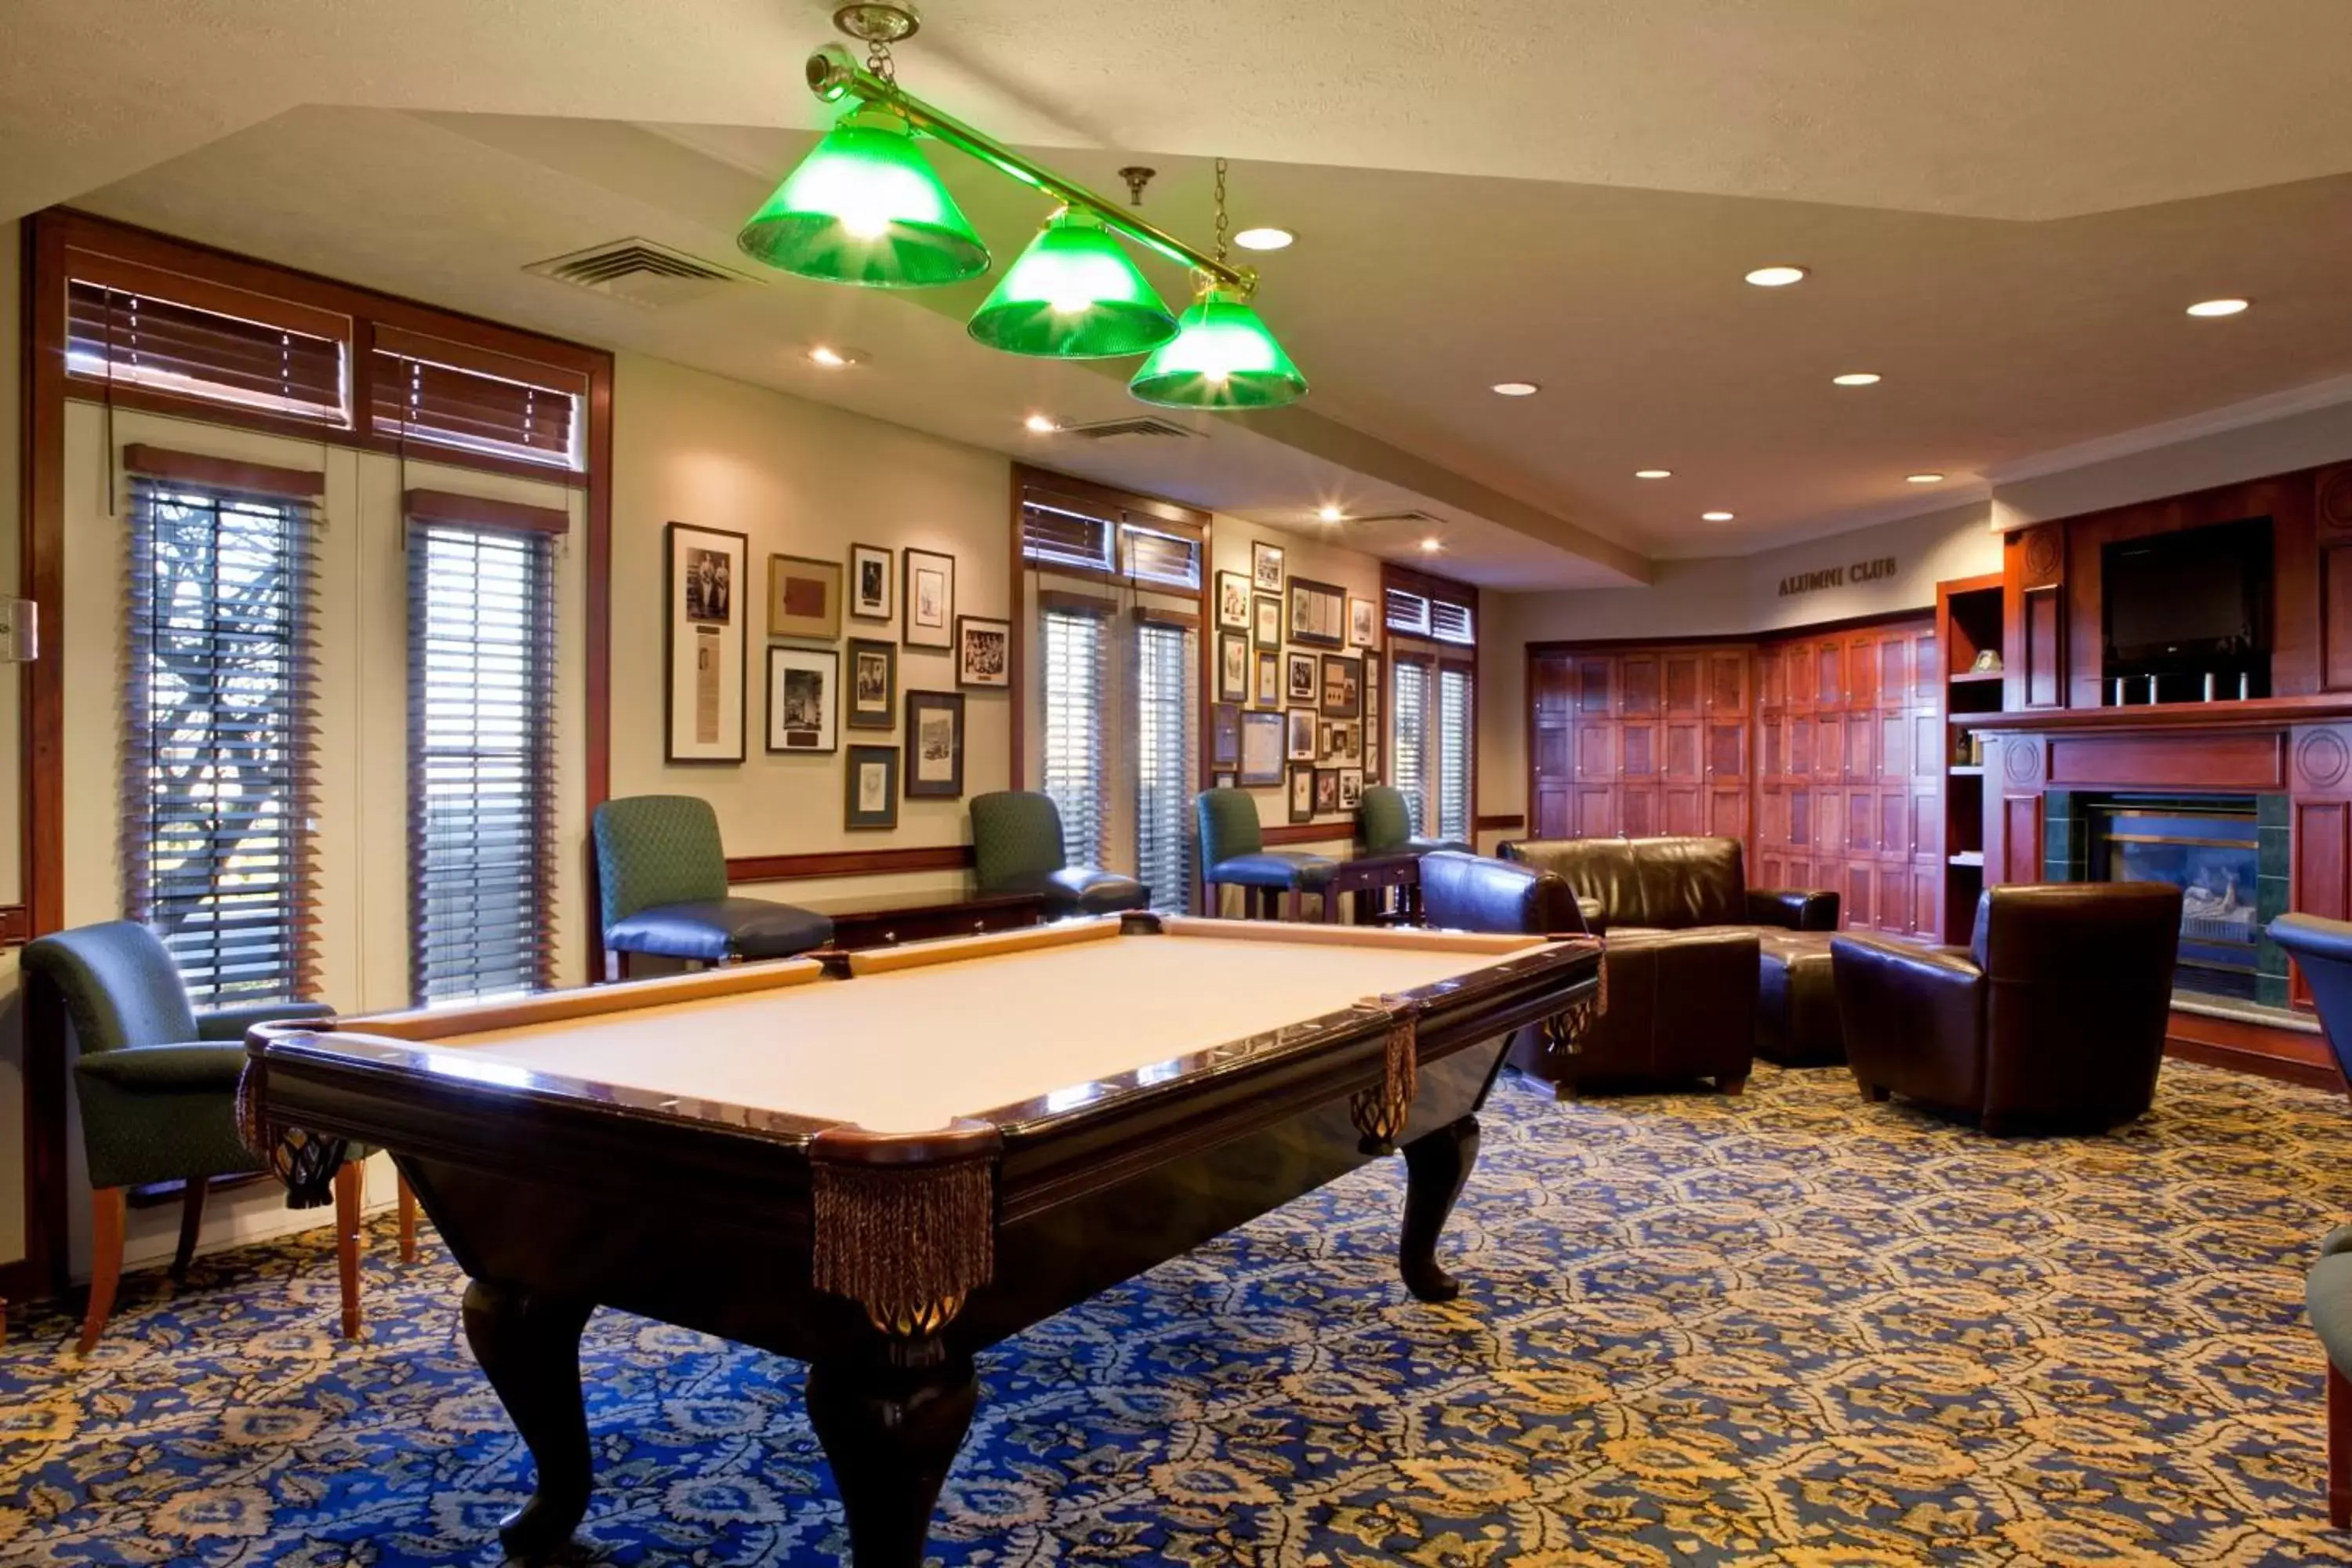 Game Room, Billiards in Varsity Clubs of America South Bend